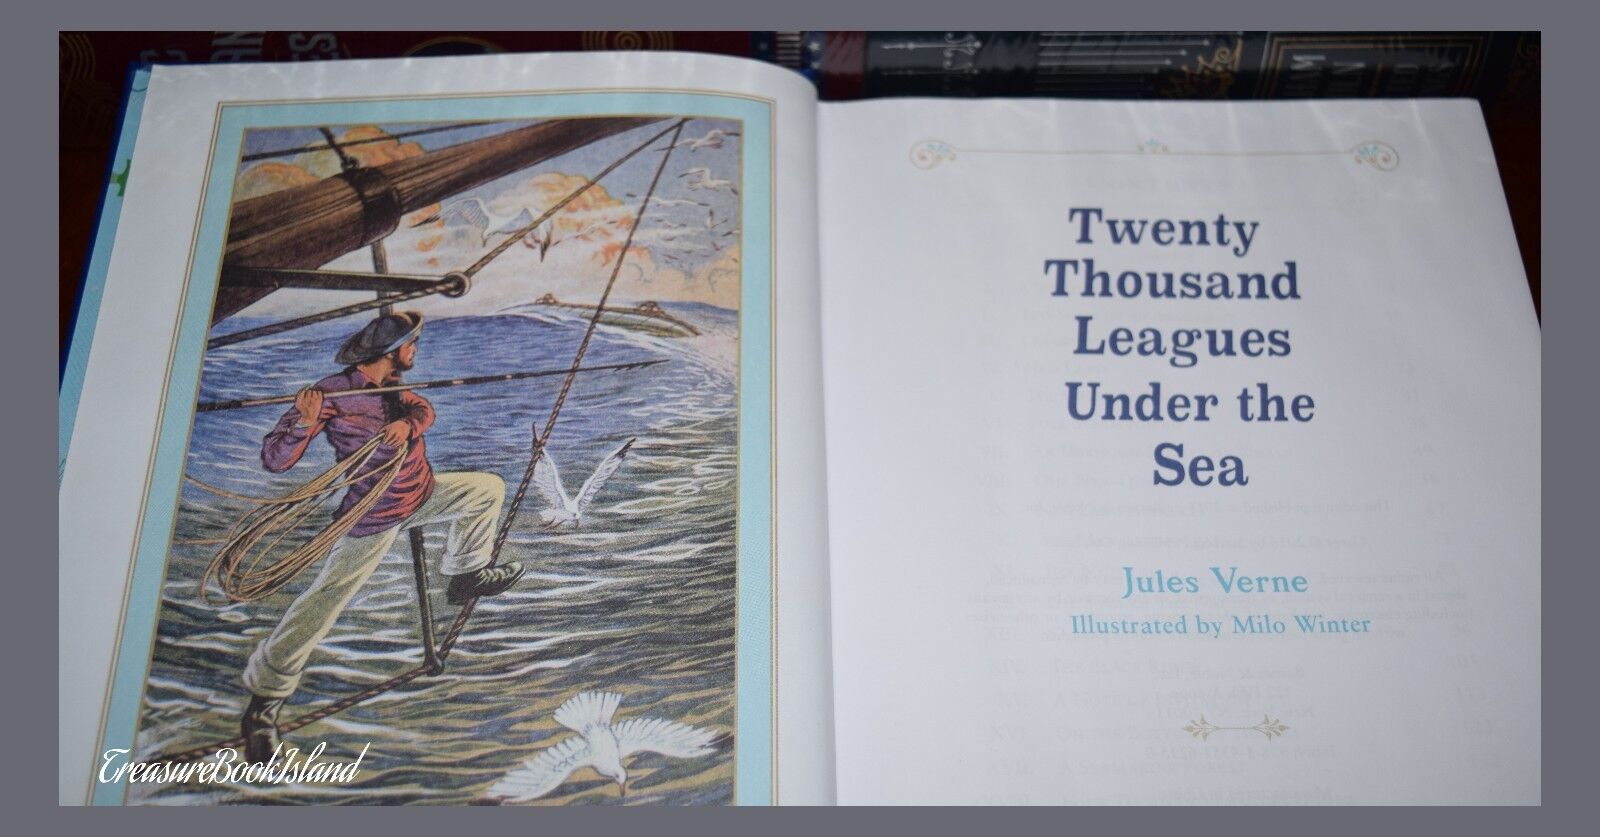 Twenty Thousand Leagues Under the Sea by Jules Verne New Sealed Leather Bound Ed Без бренда - фотография #6